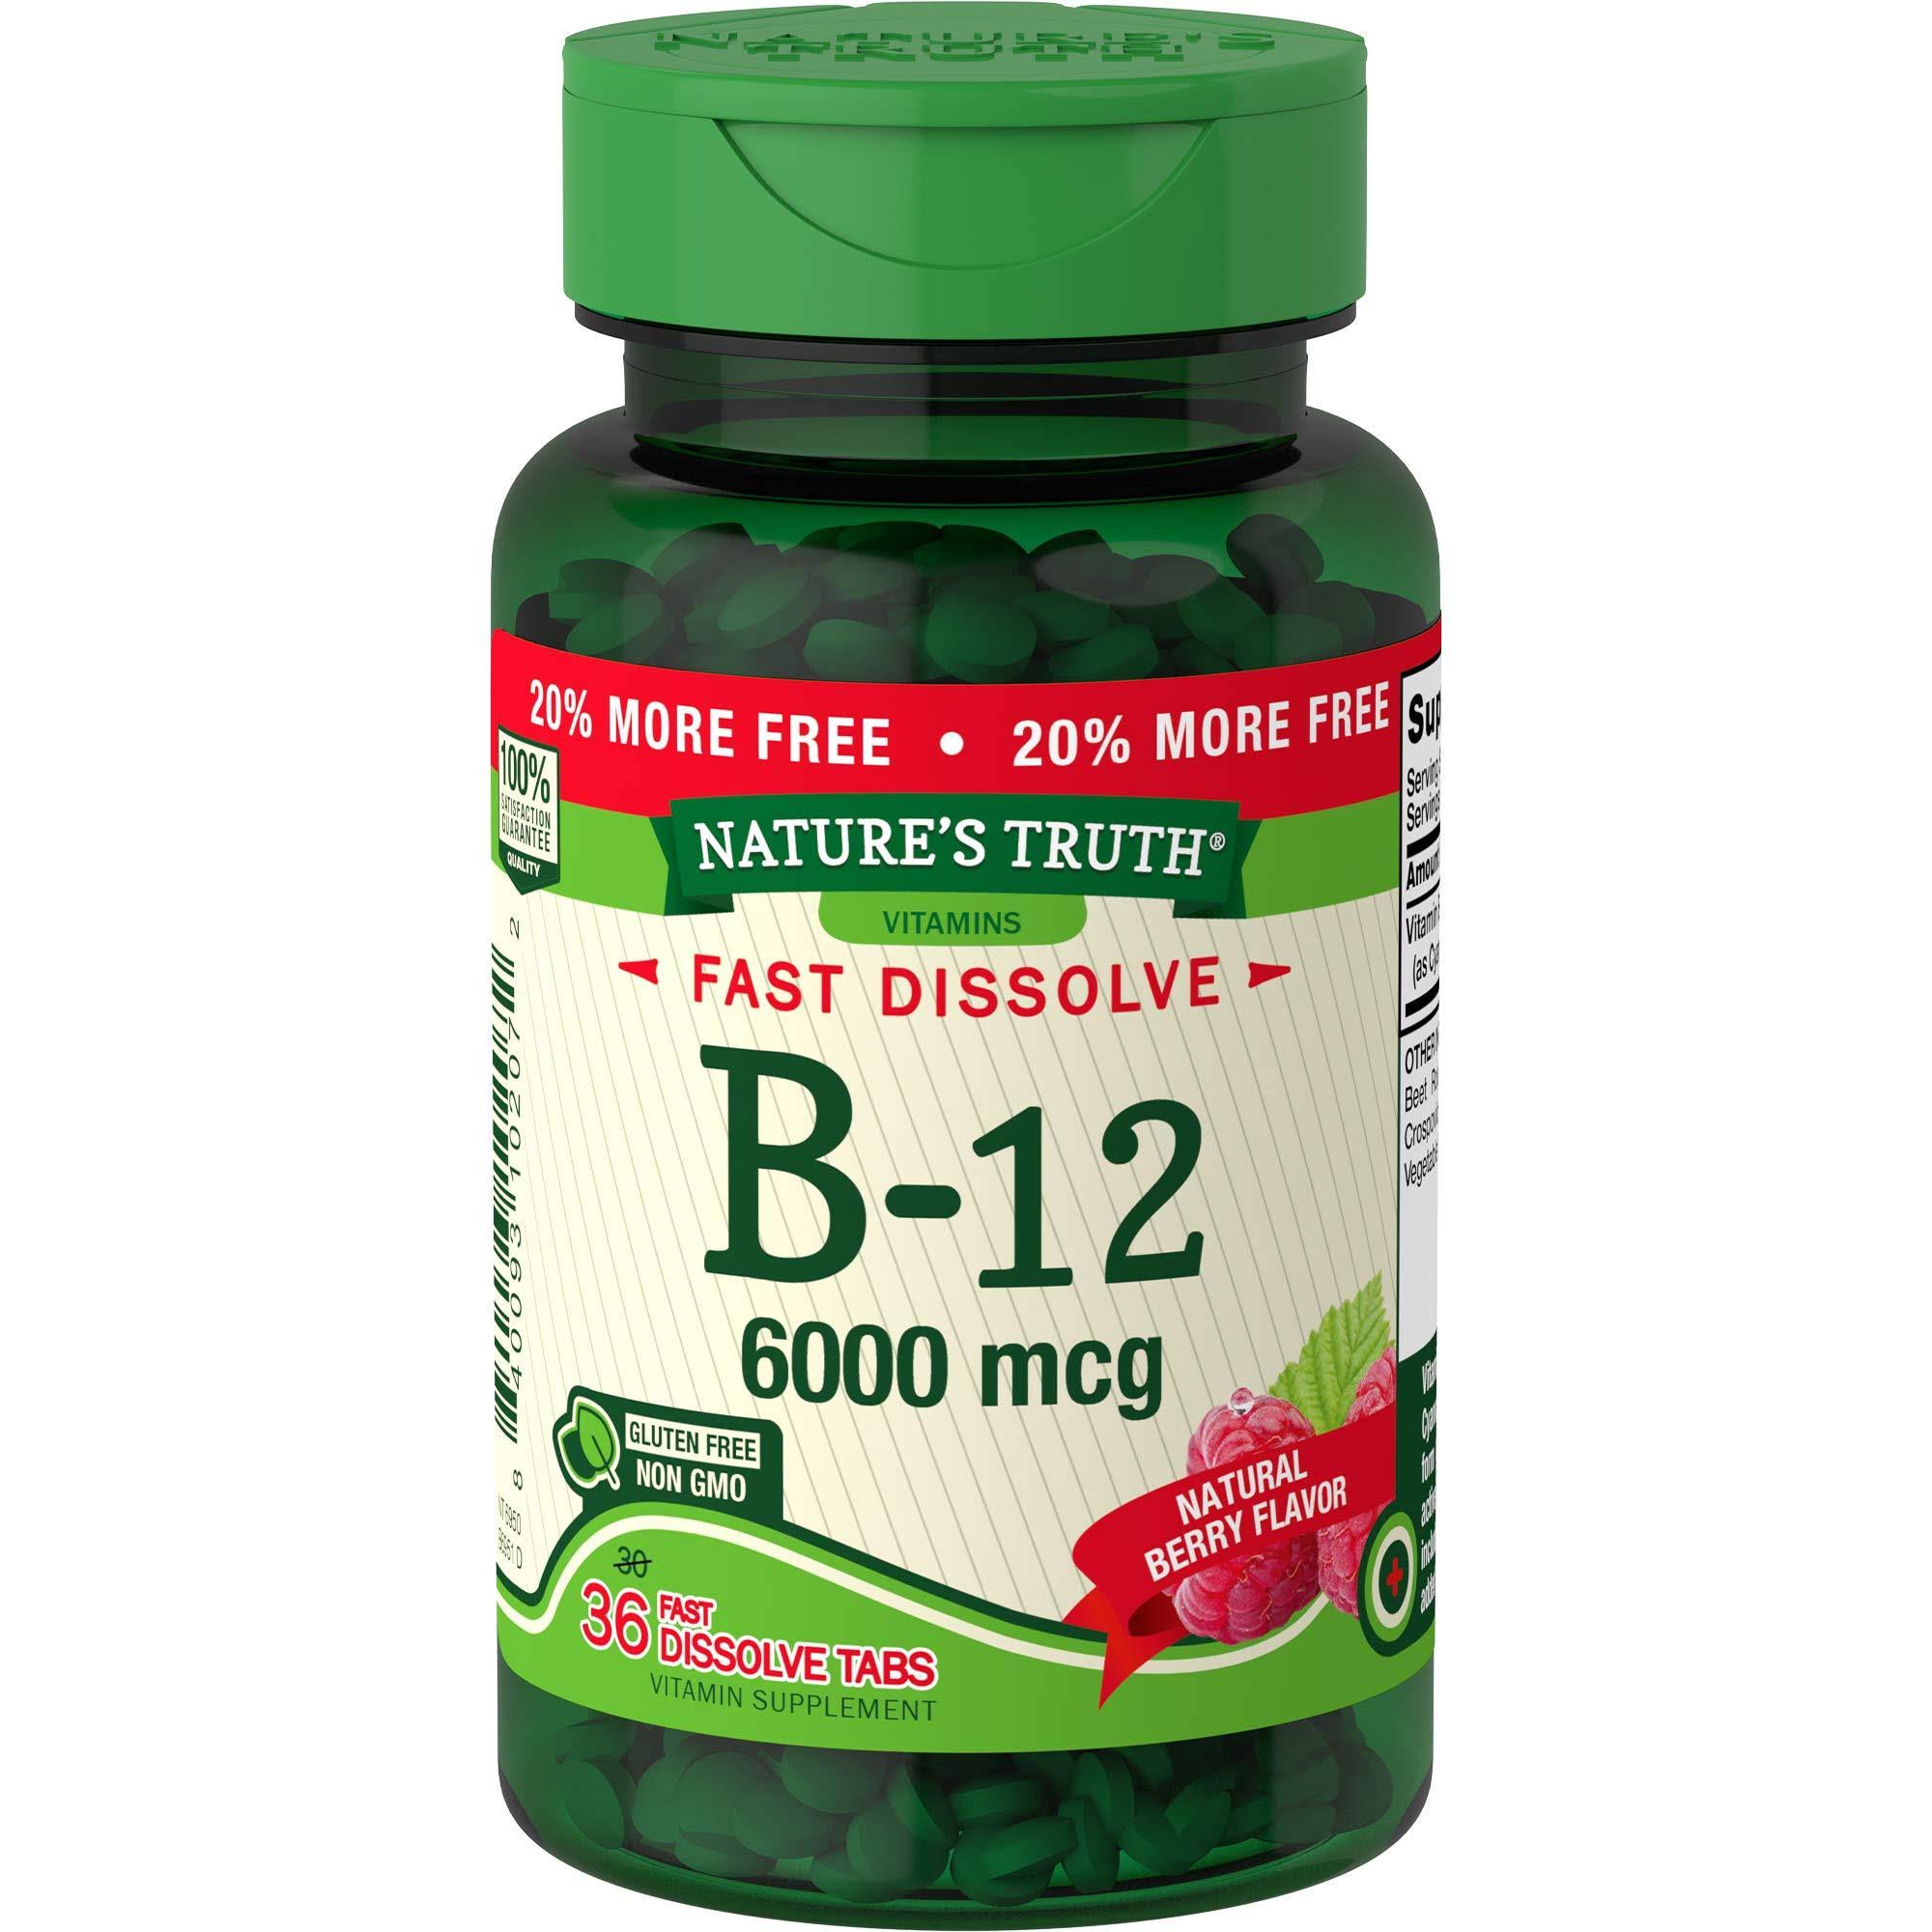 Nature's Truth Vitamin B 12 Dietary Supplement - 36ct, Natural Berry